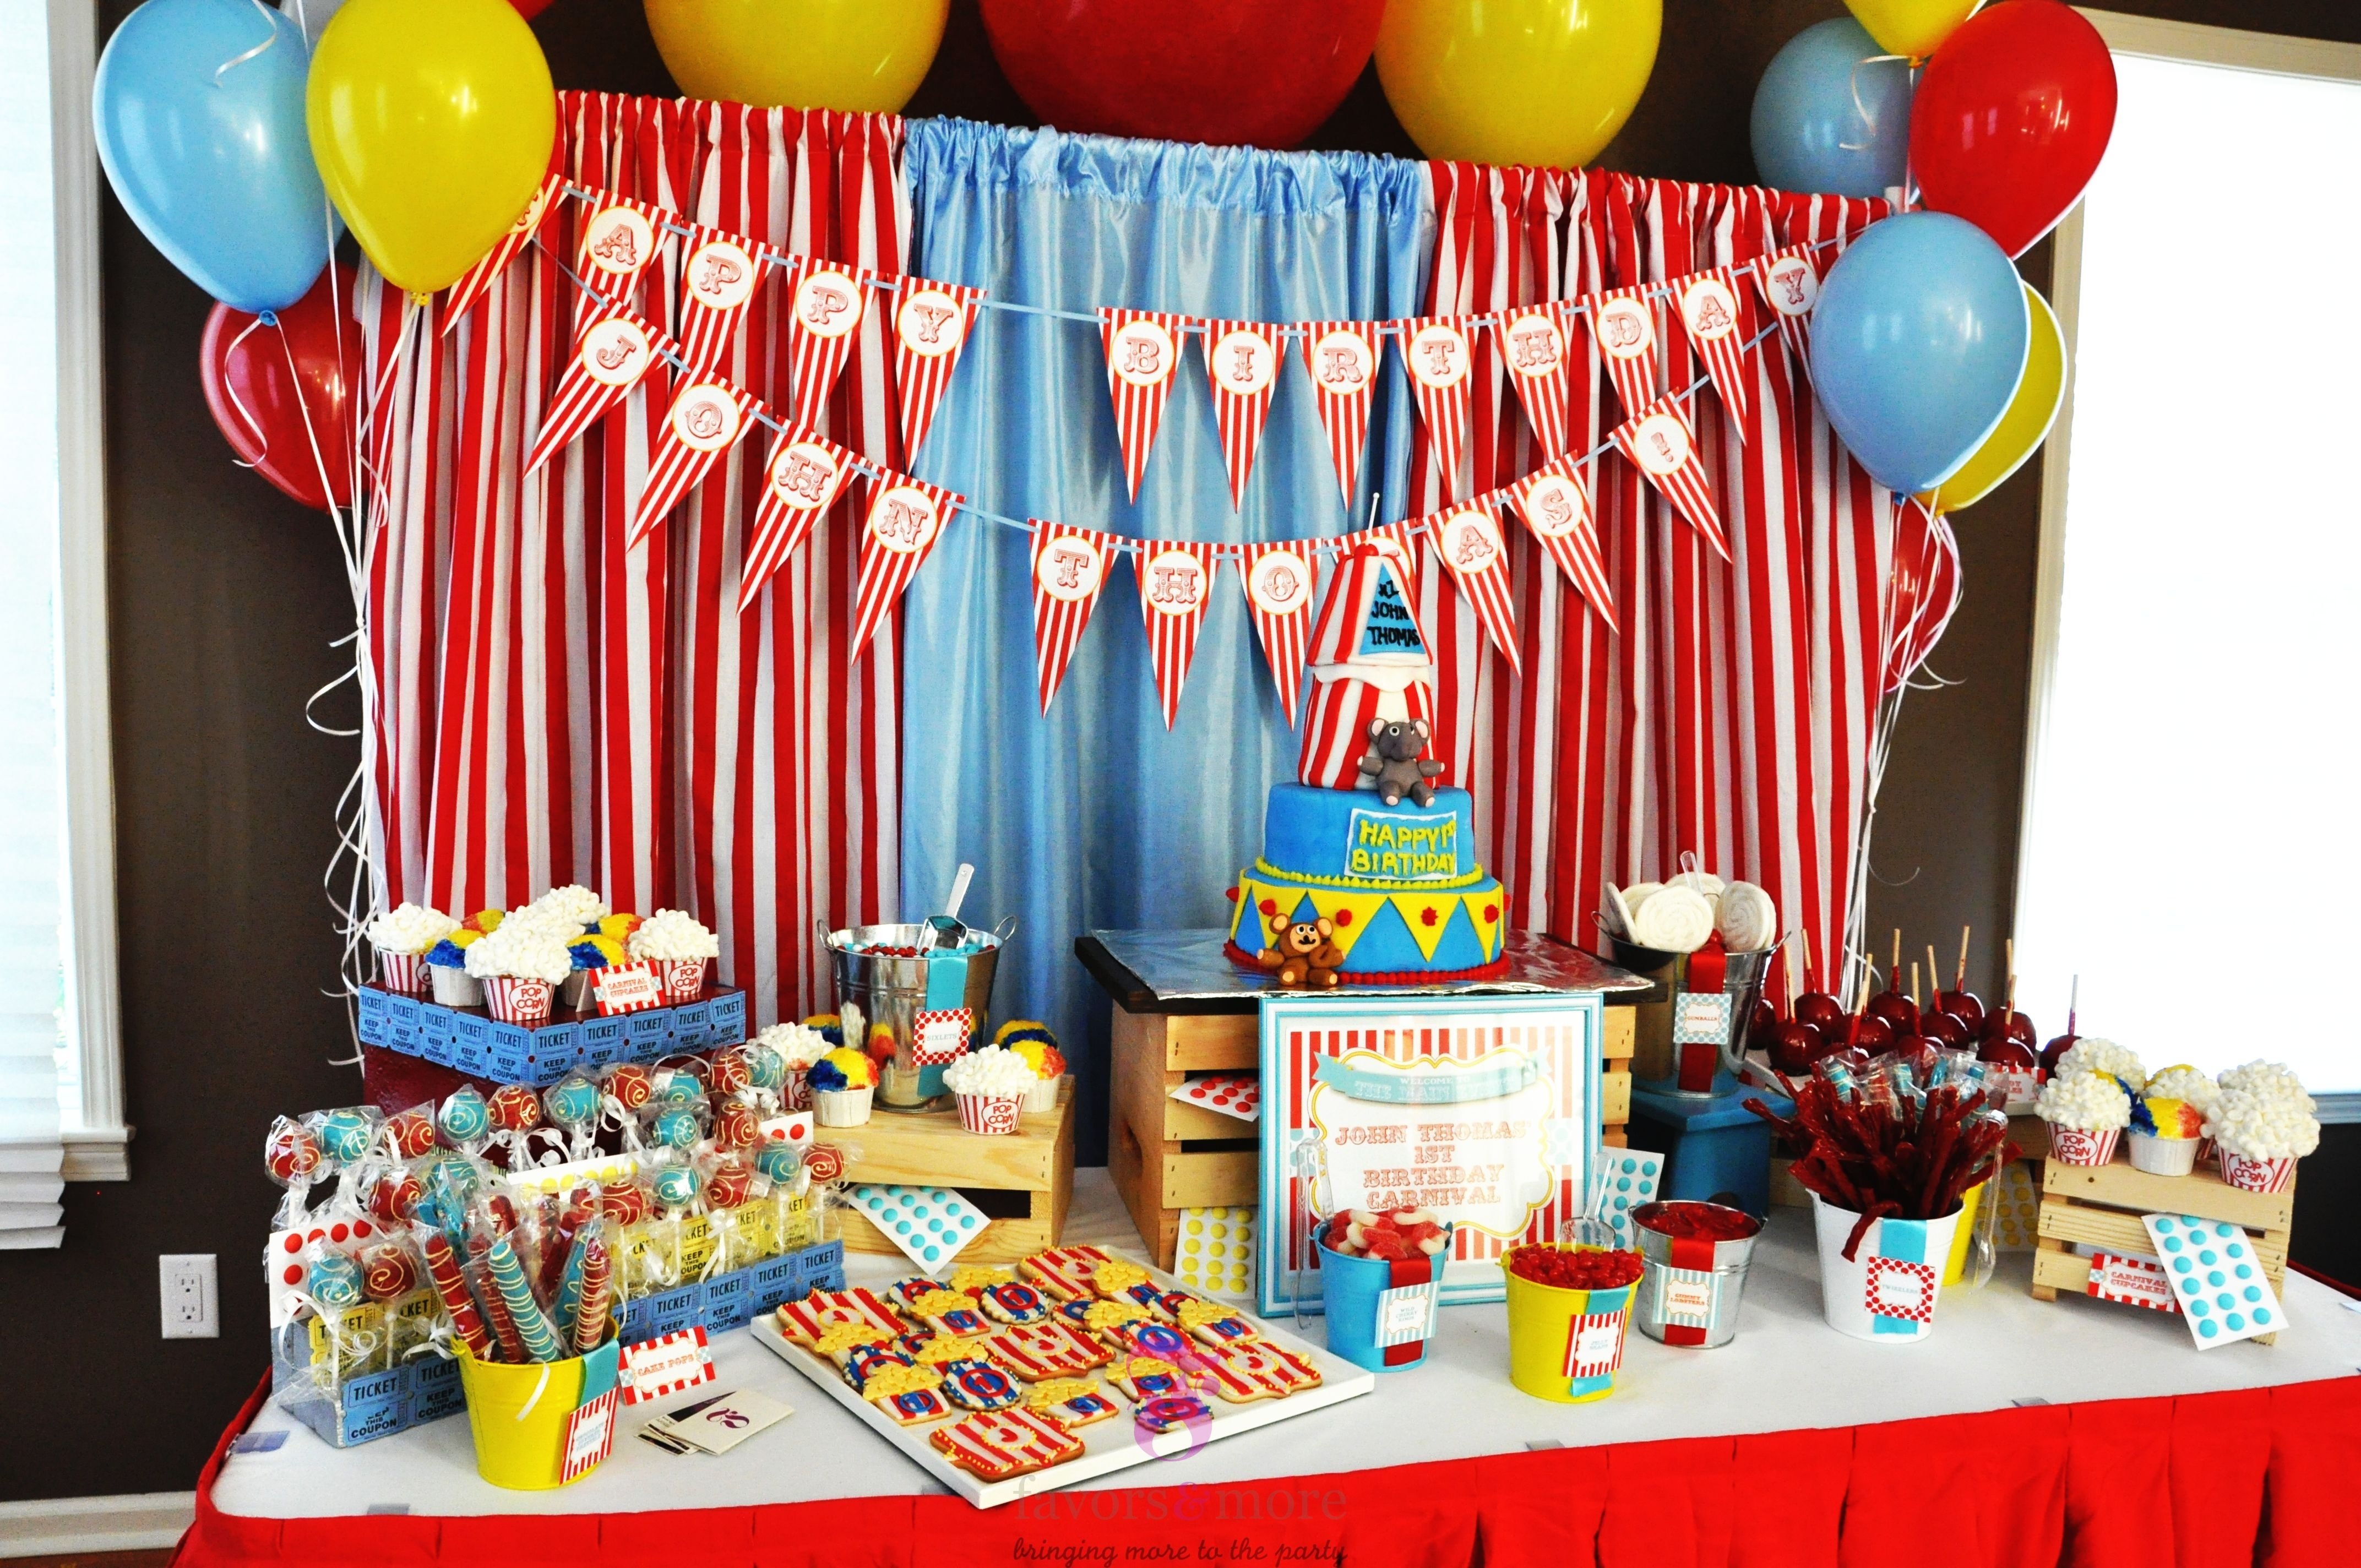 10 Unique Ideas For A Birthday Party 15 best carnival birthday party ideas birthday inspire 3 2022